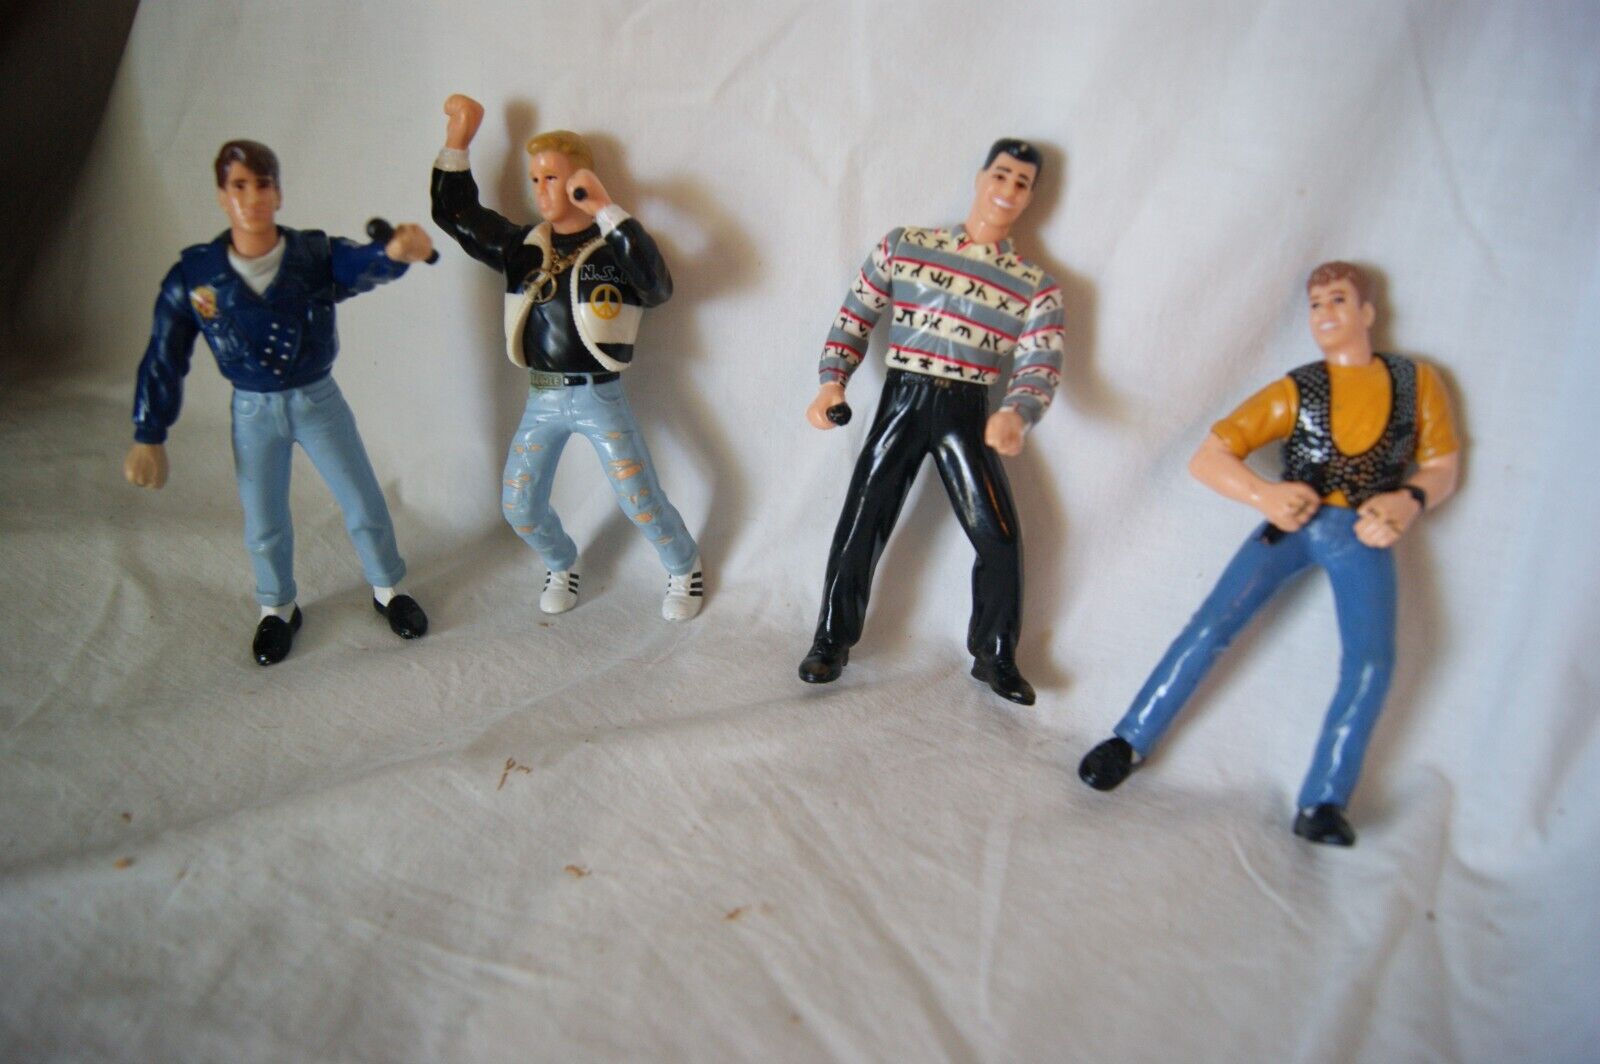 VINTAGE NEW KIDS ON THE BLOCK ACTION FIGURES FROM THE 1990s